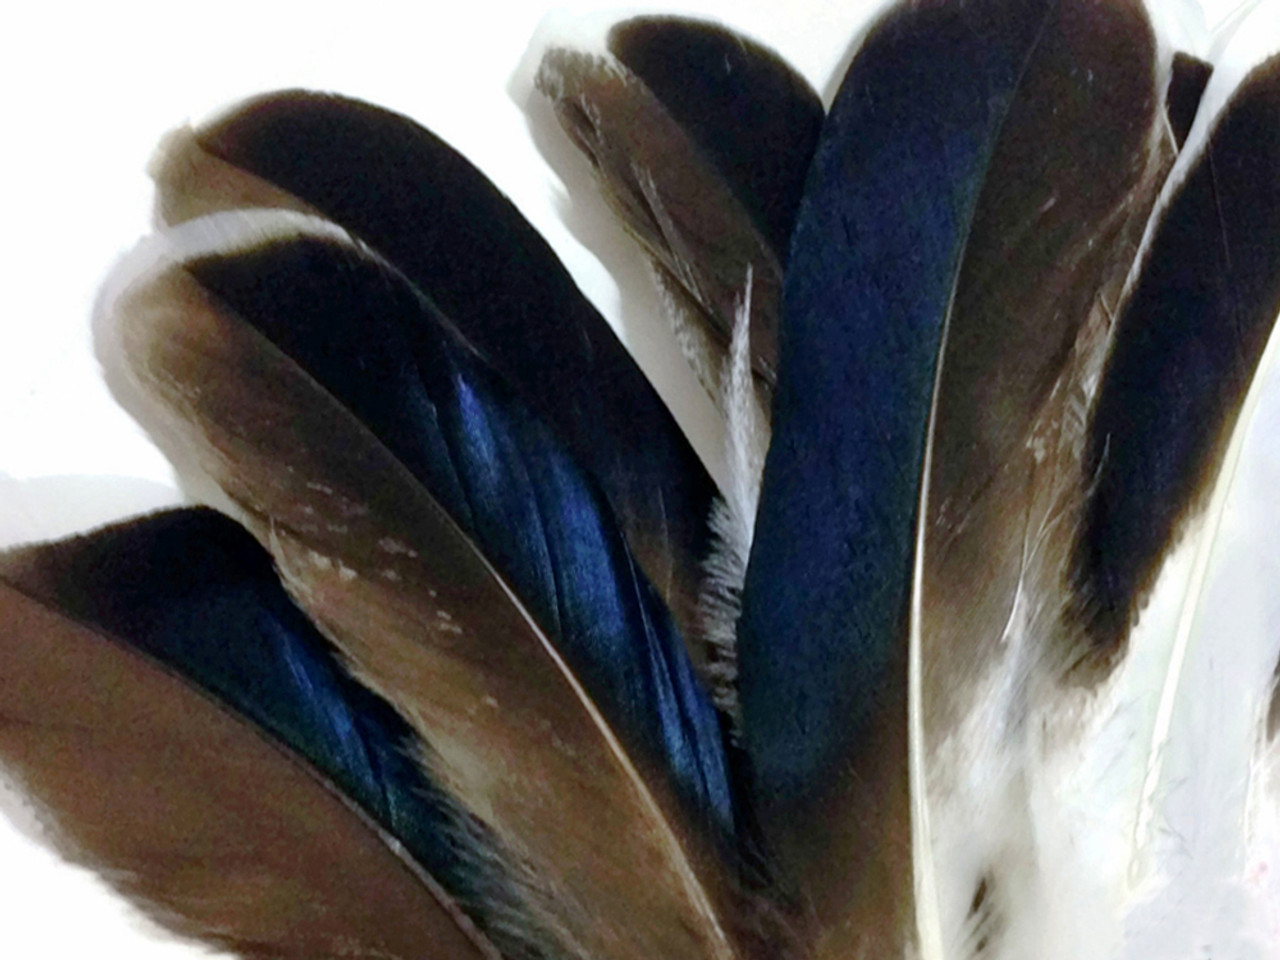 1 Pack - Dyed Brown Duck Primary Wing Pointer Feathers 0.50 Oz. Craft  Halloween Costume Carnival Supply | Moonlight Feather